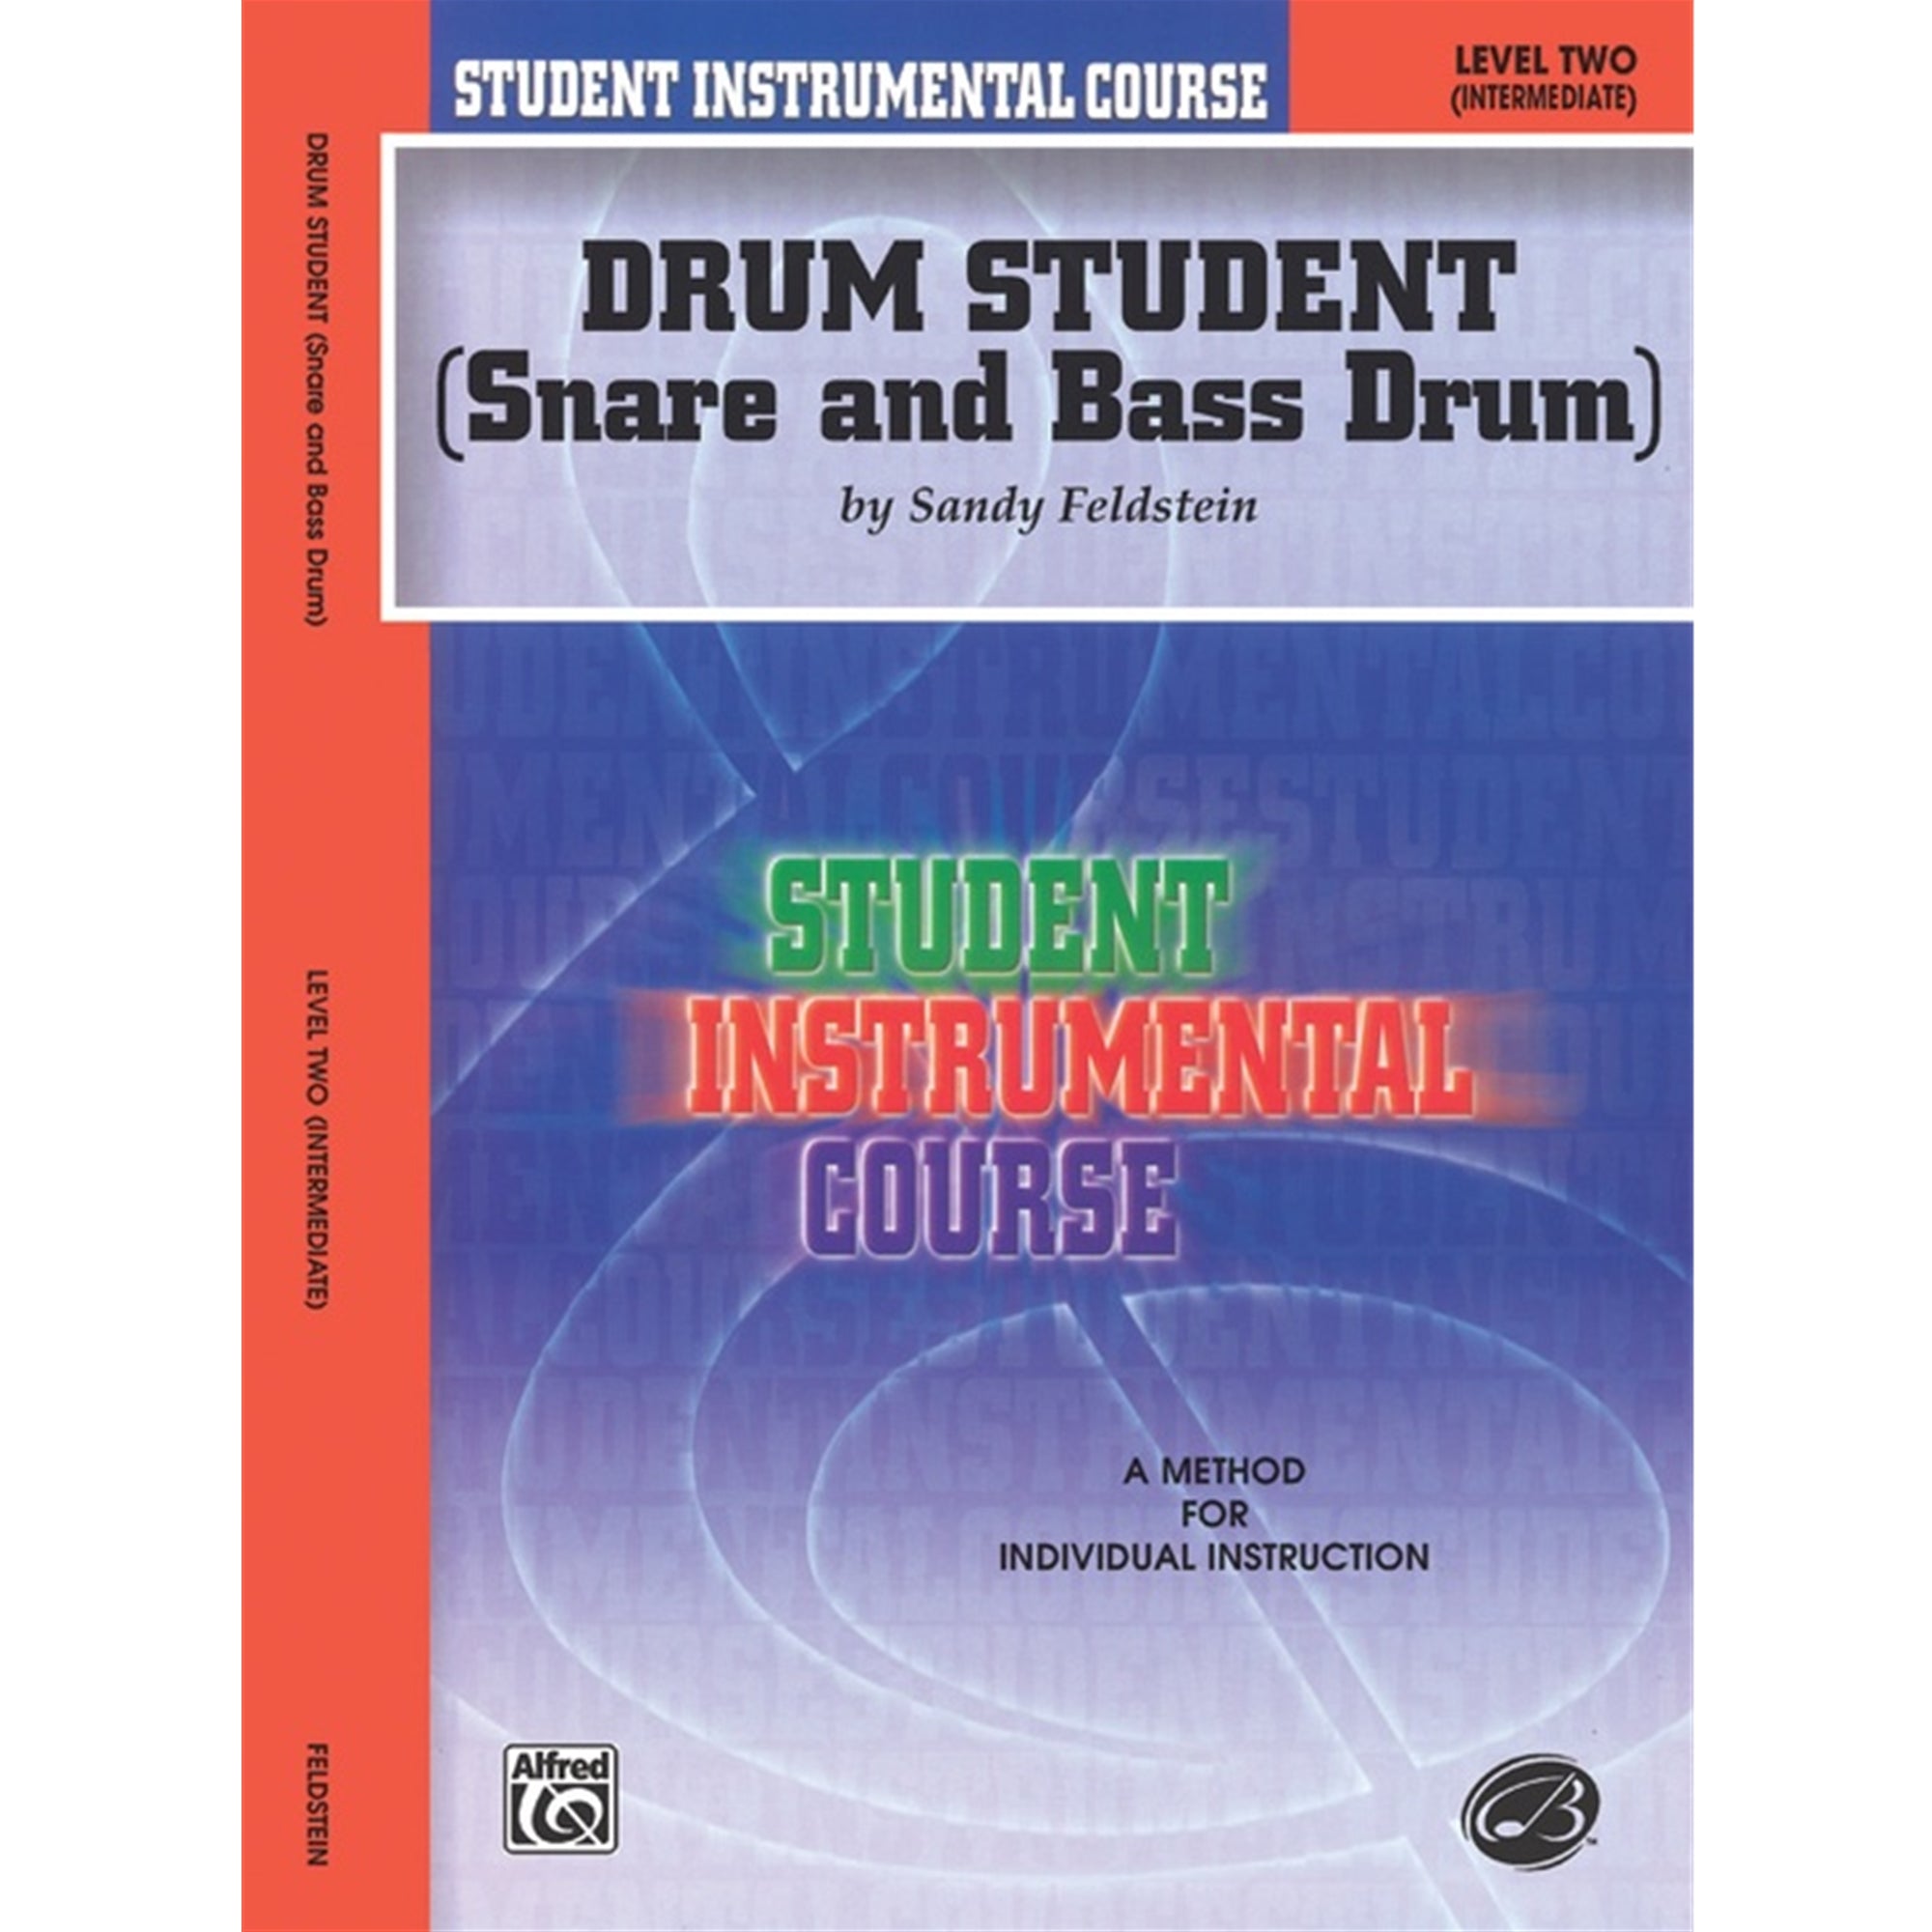 Alfred Publishi BIC00271A Student Instrumental Course: Drum Student, Level II [Snare & Bass Drum]